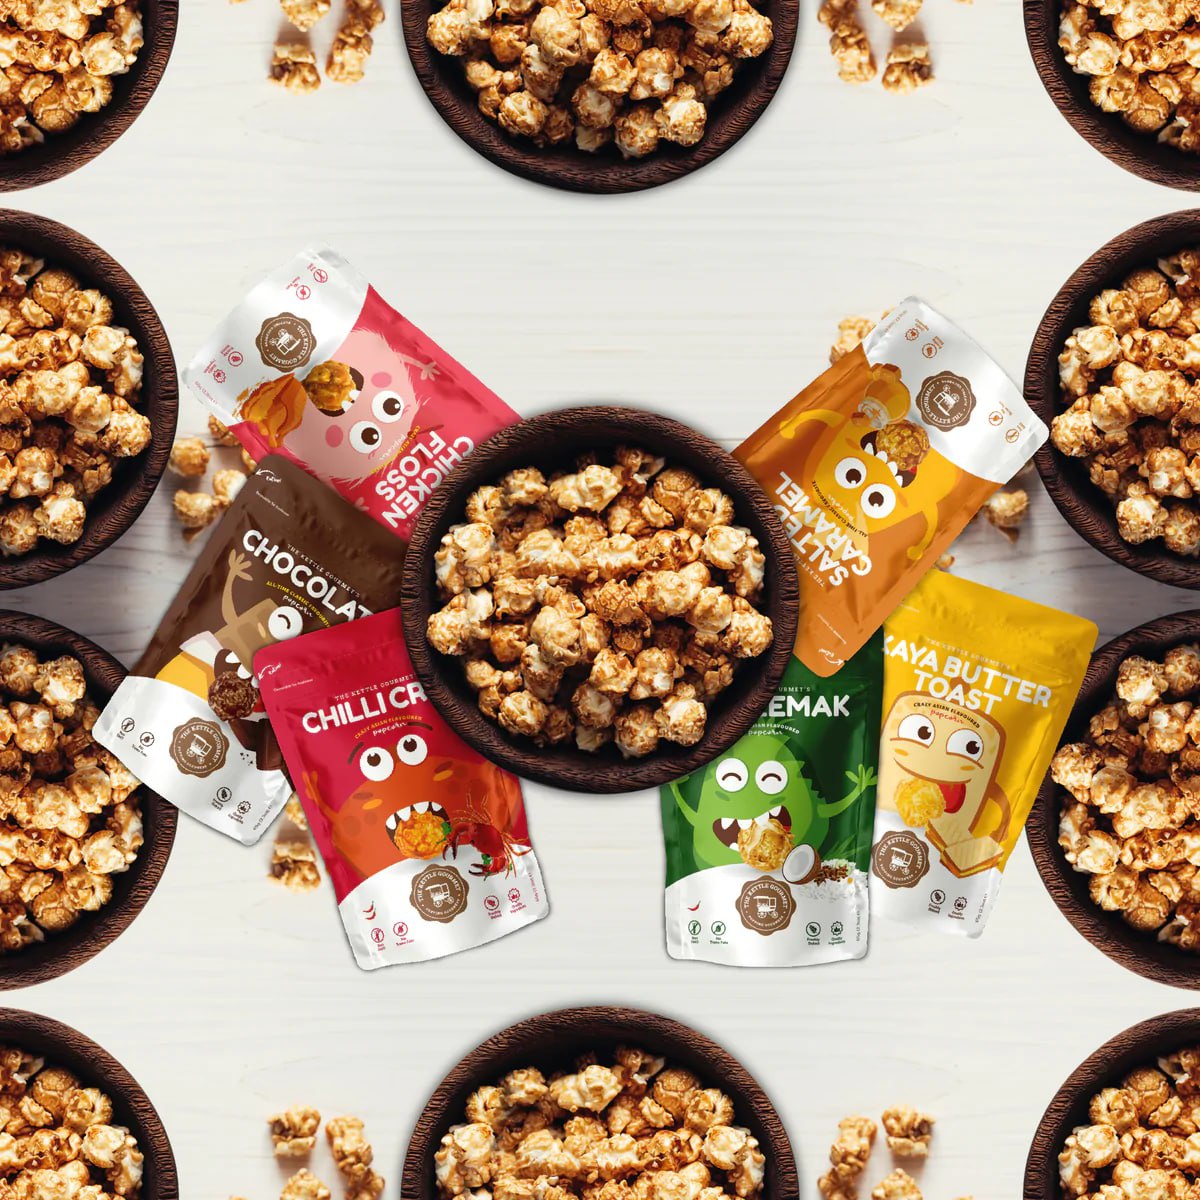 Popcorn to go: The Kettle Gourmet’s Popcorn perfect for every occasion